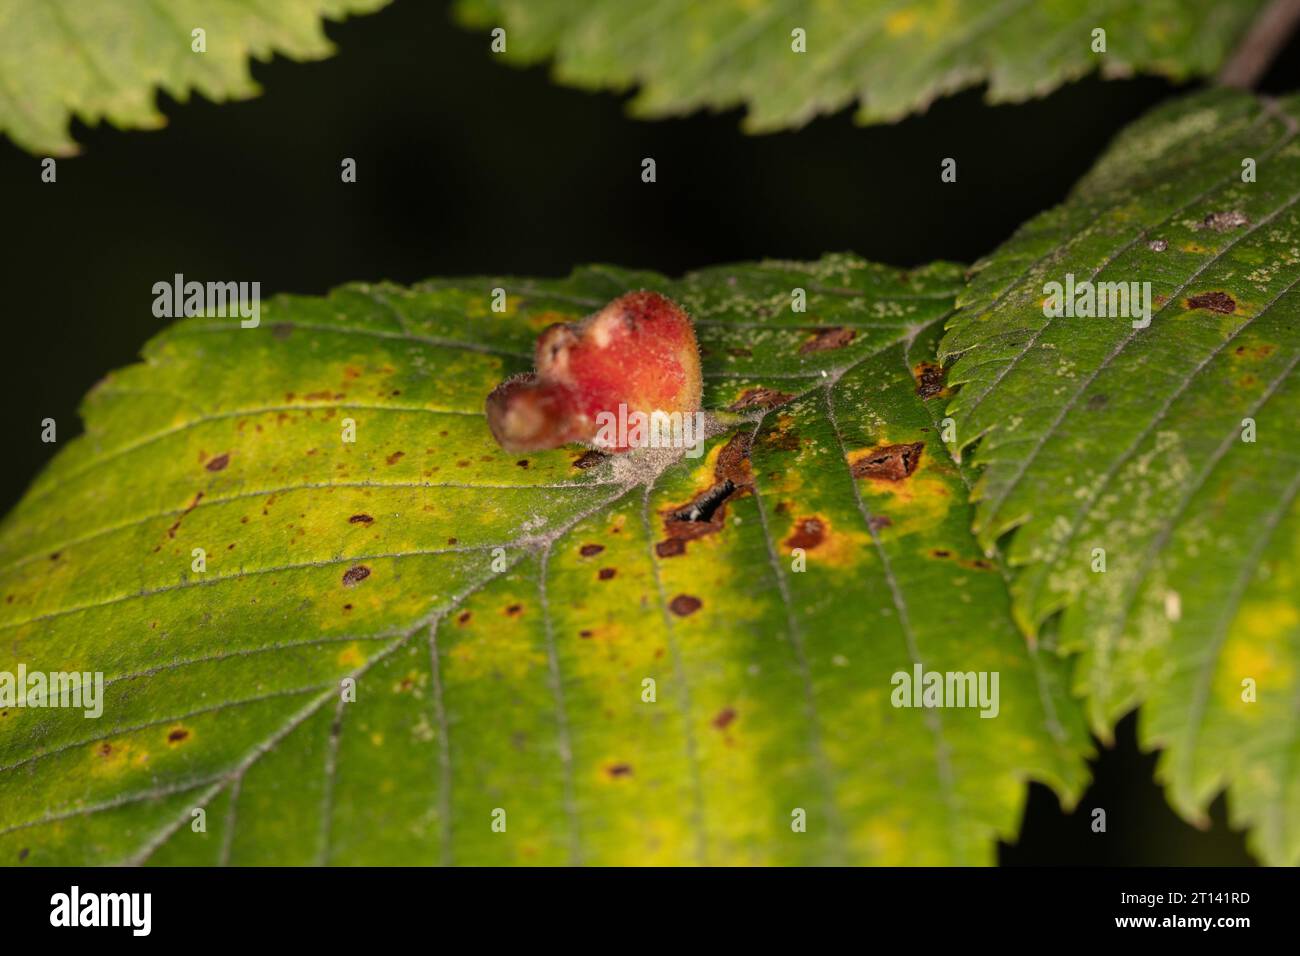 Aceria macrorhynchus and Artacris macrorhynchus, Gall mites. They are members of the Arachnid group, which includes spiders and mites Stock Photo